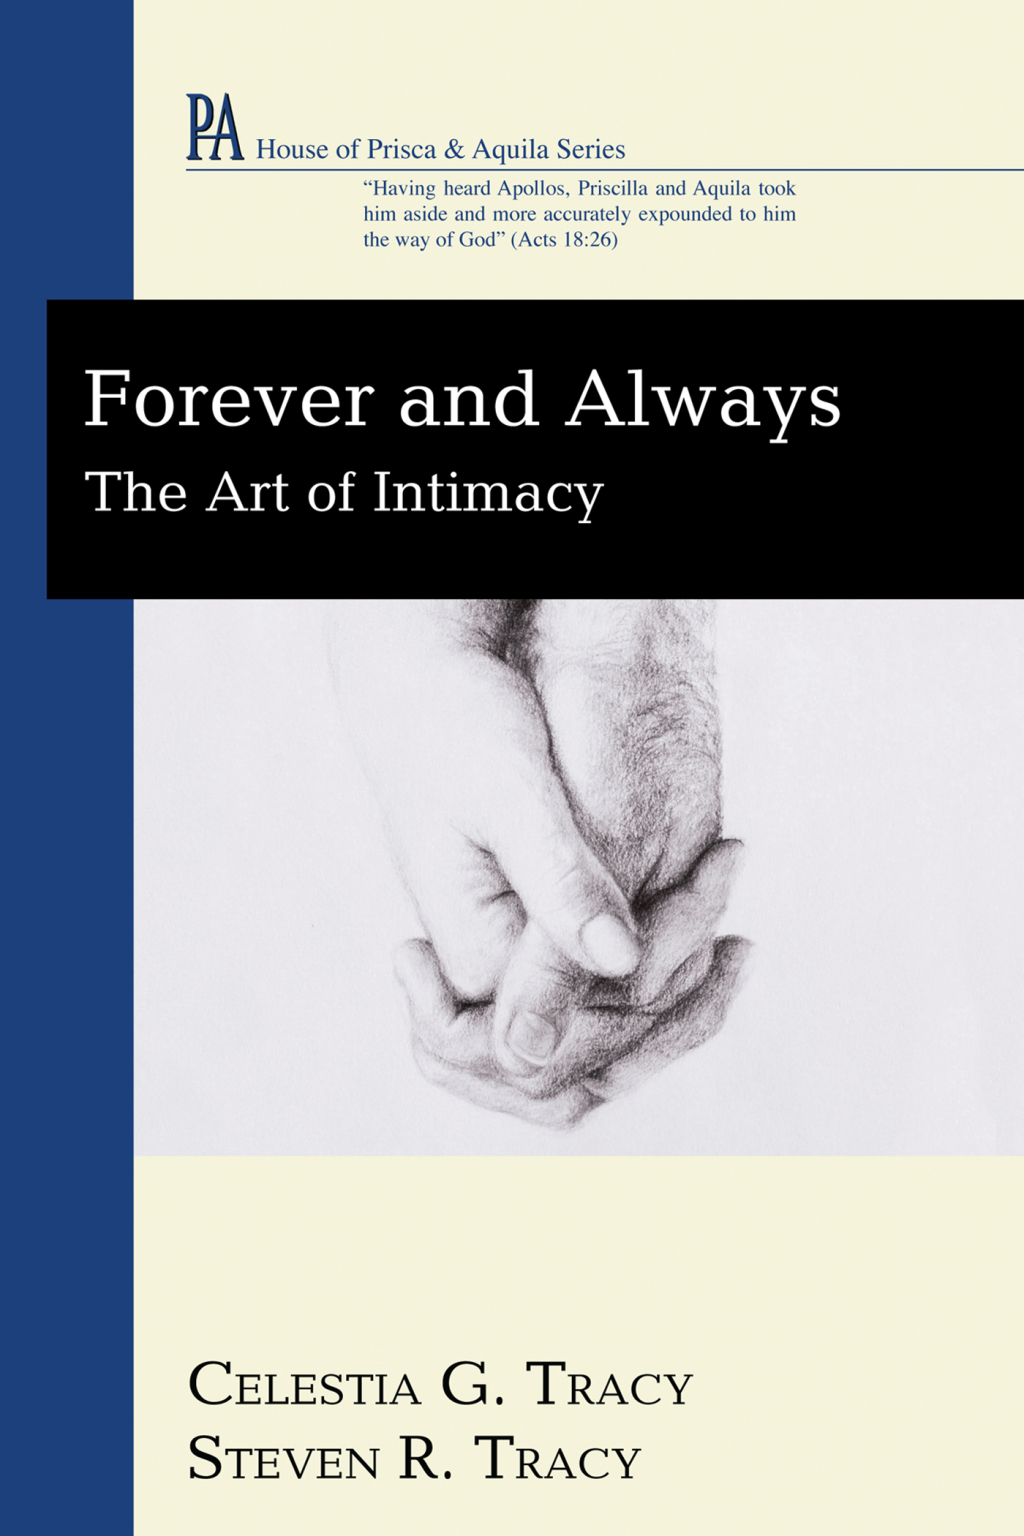 Forever and Always (eBook) - Celestia G. Tracy; Steven R. Tracy,